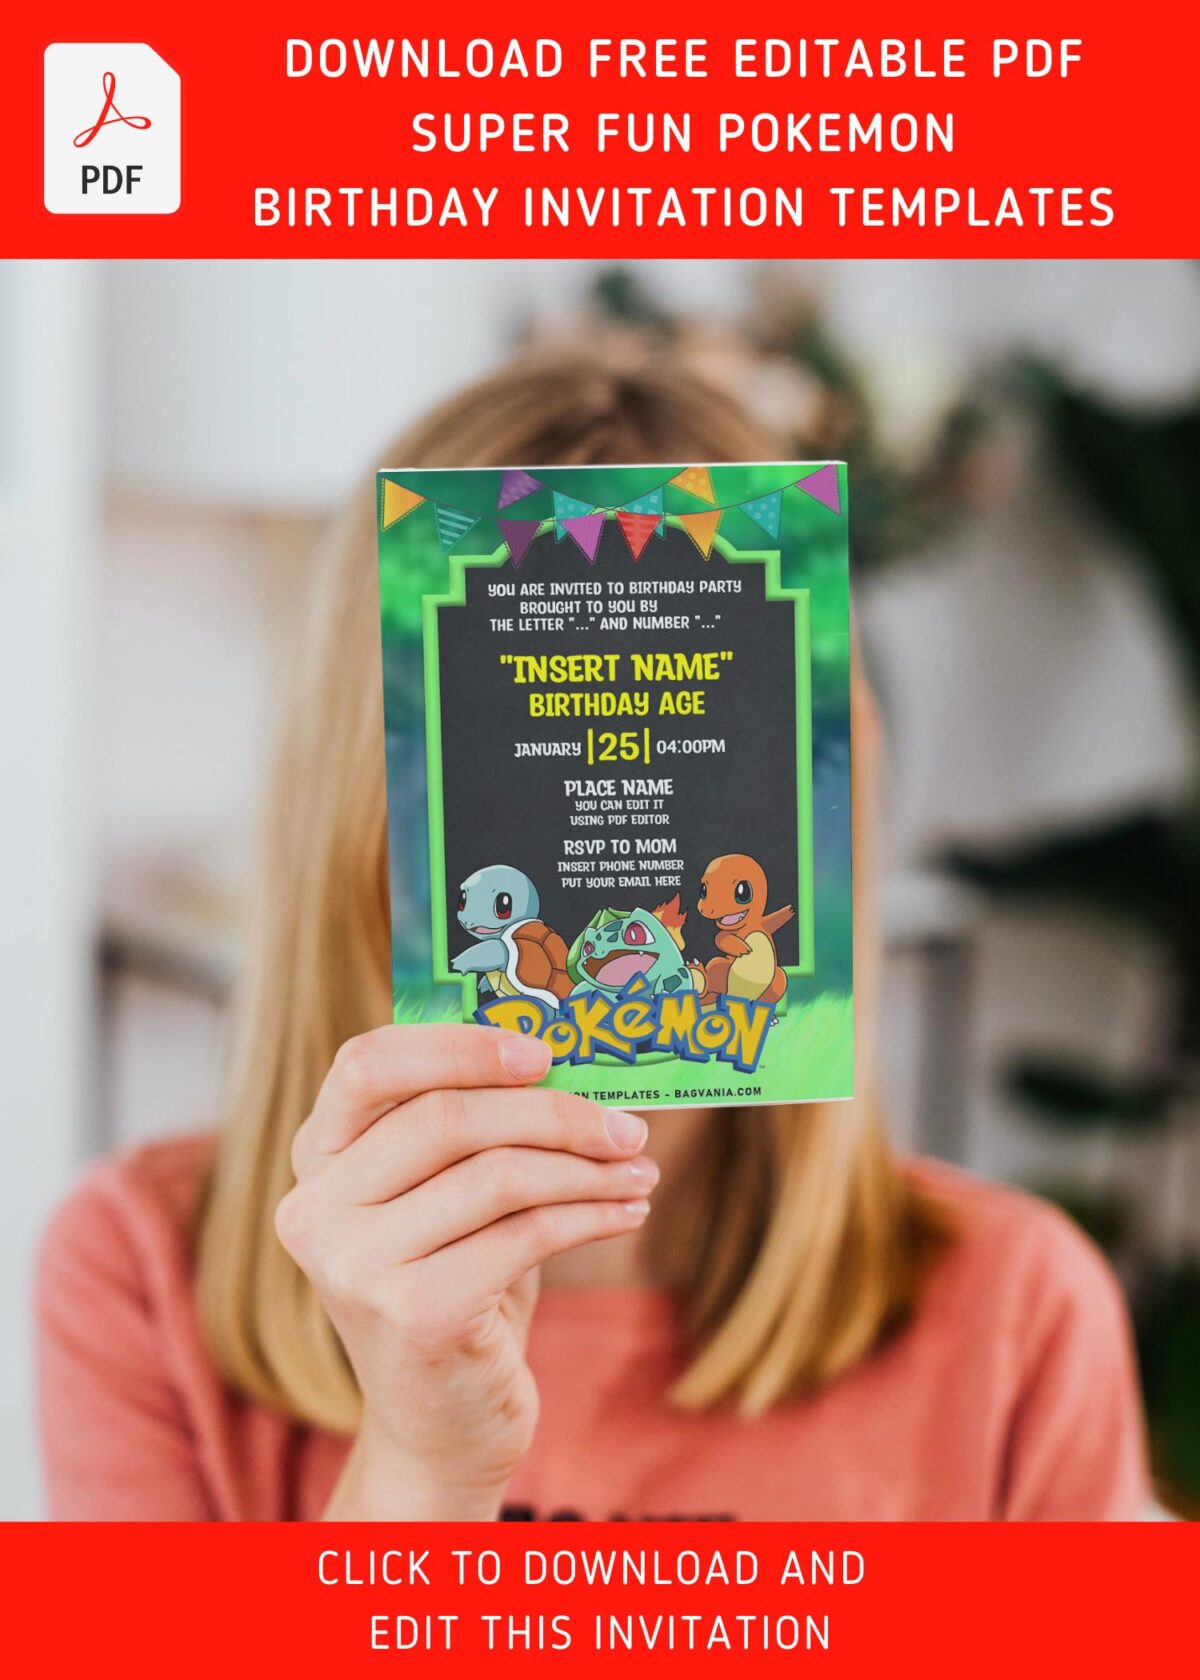 (Free Editable PDF) Hilarious Pikachu And Friends Pokémon Birthday Invitation Templates with colorful bunting flags